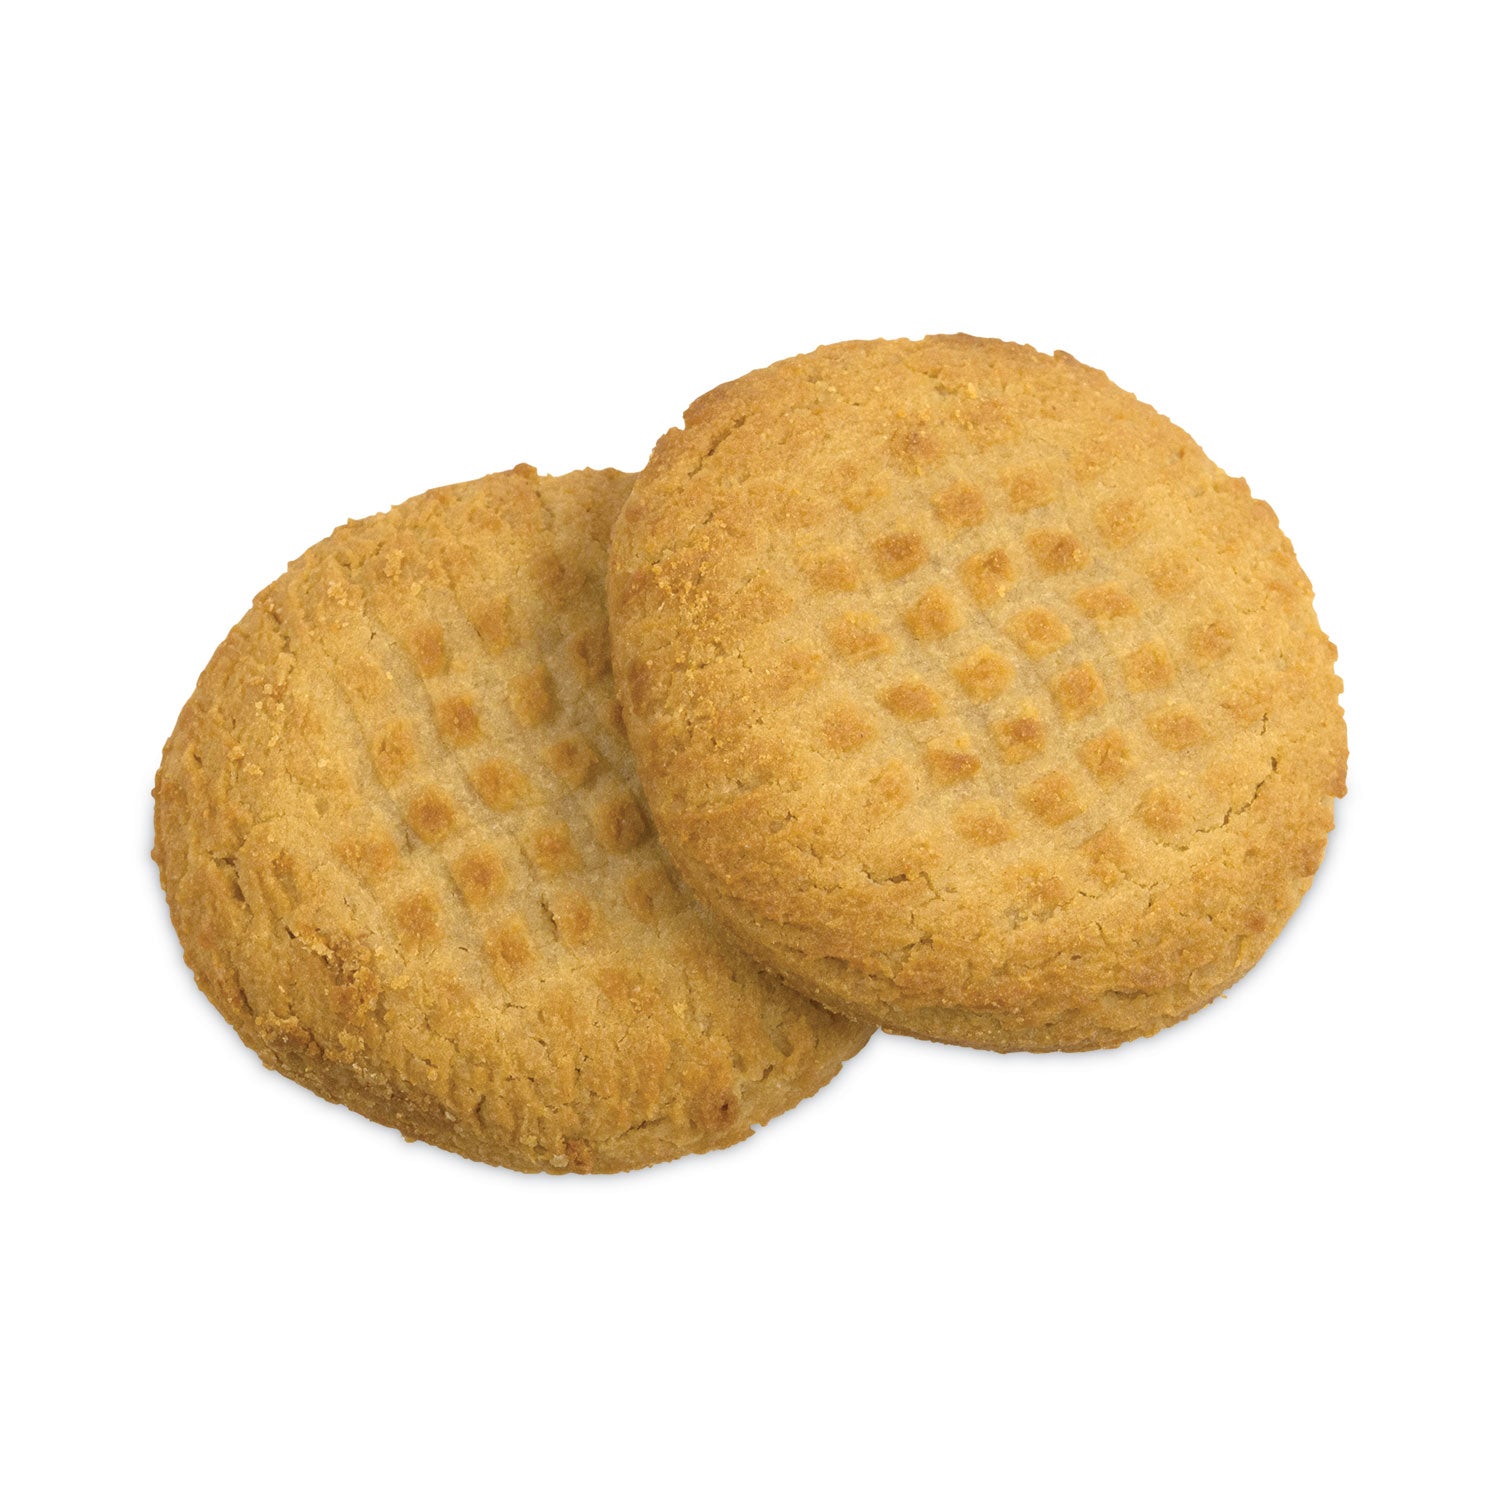 homestyle-peanut-butter-cookies-25-oz-pack-2-cookies-pack-60-packs-carton-ships-in-1-3-business-days_grr29500063 - 2